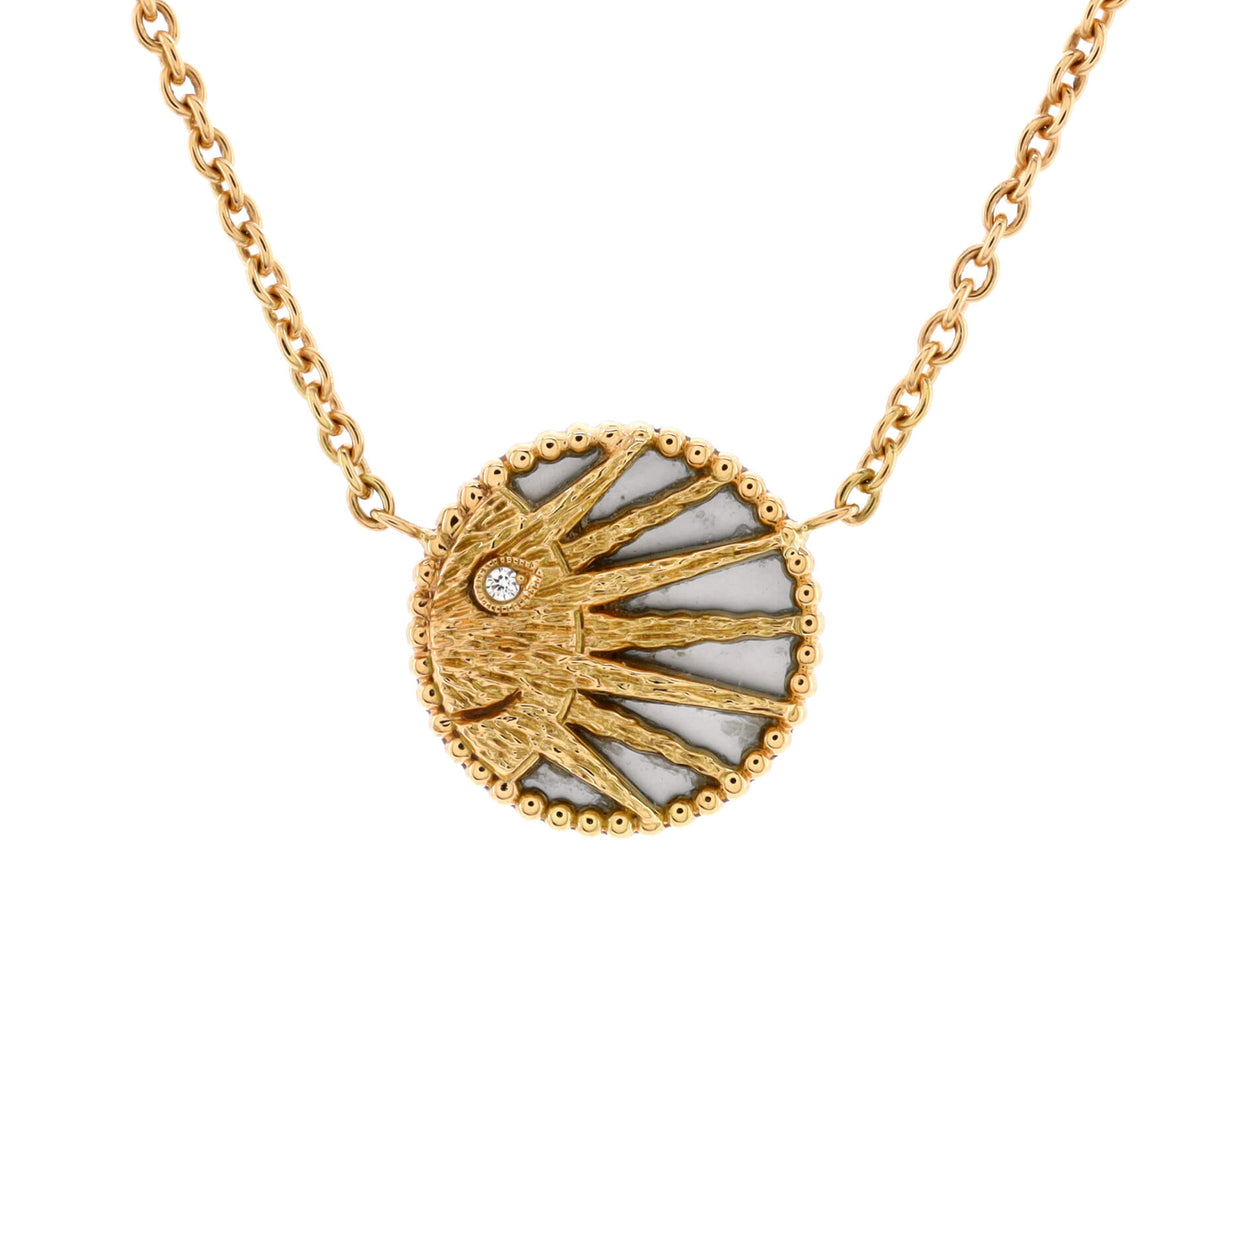 Christian Dior Rose Celeste Necklace 18K Yellow Gold and 18K White Gold ...